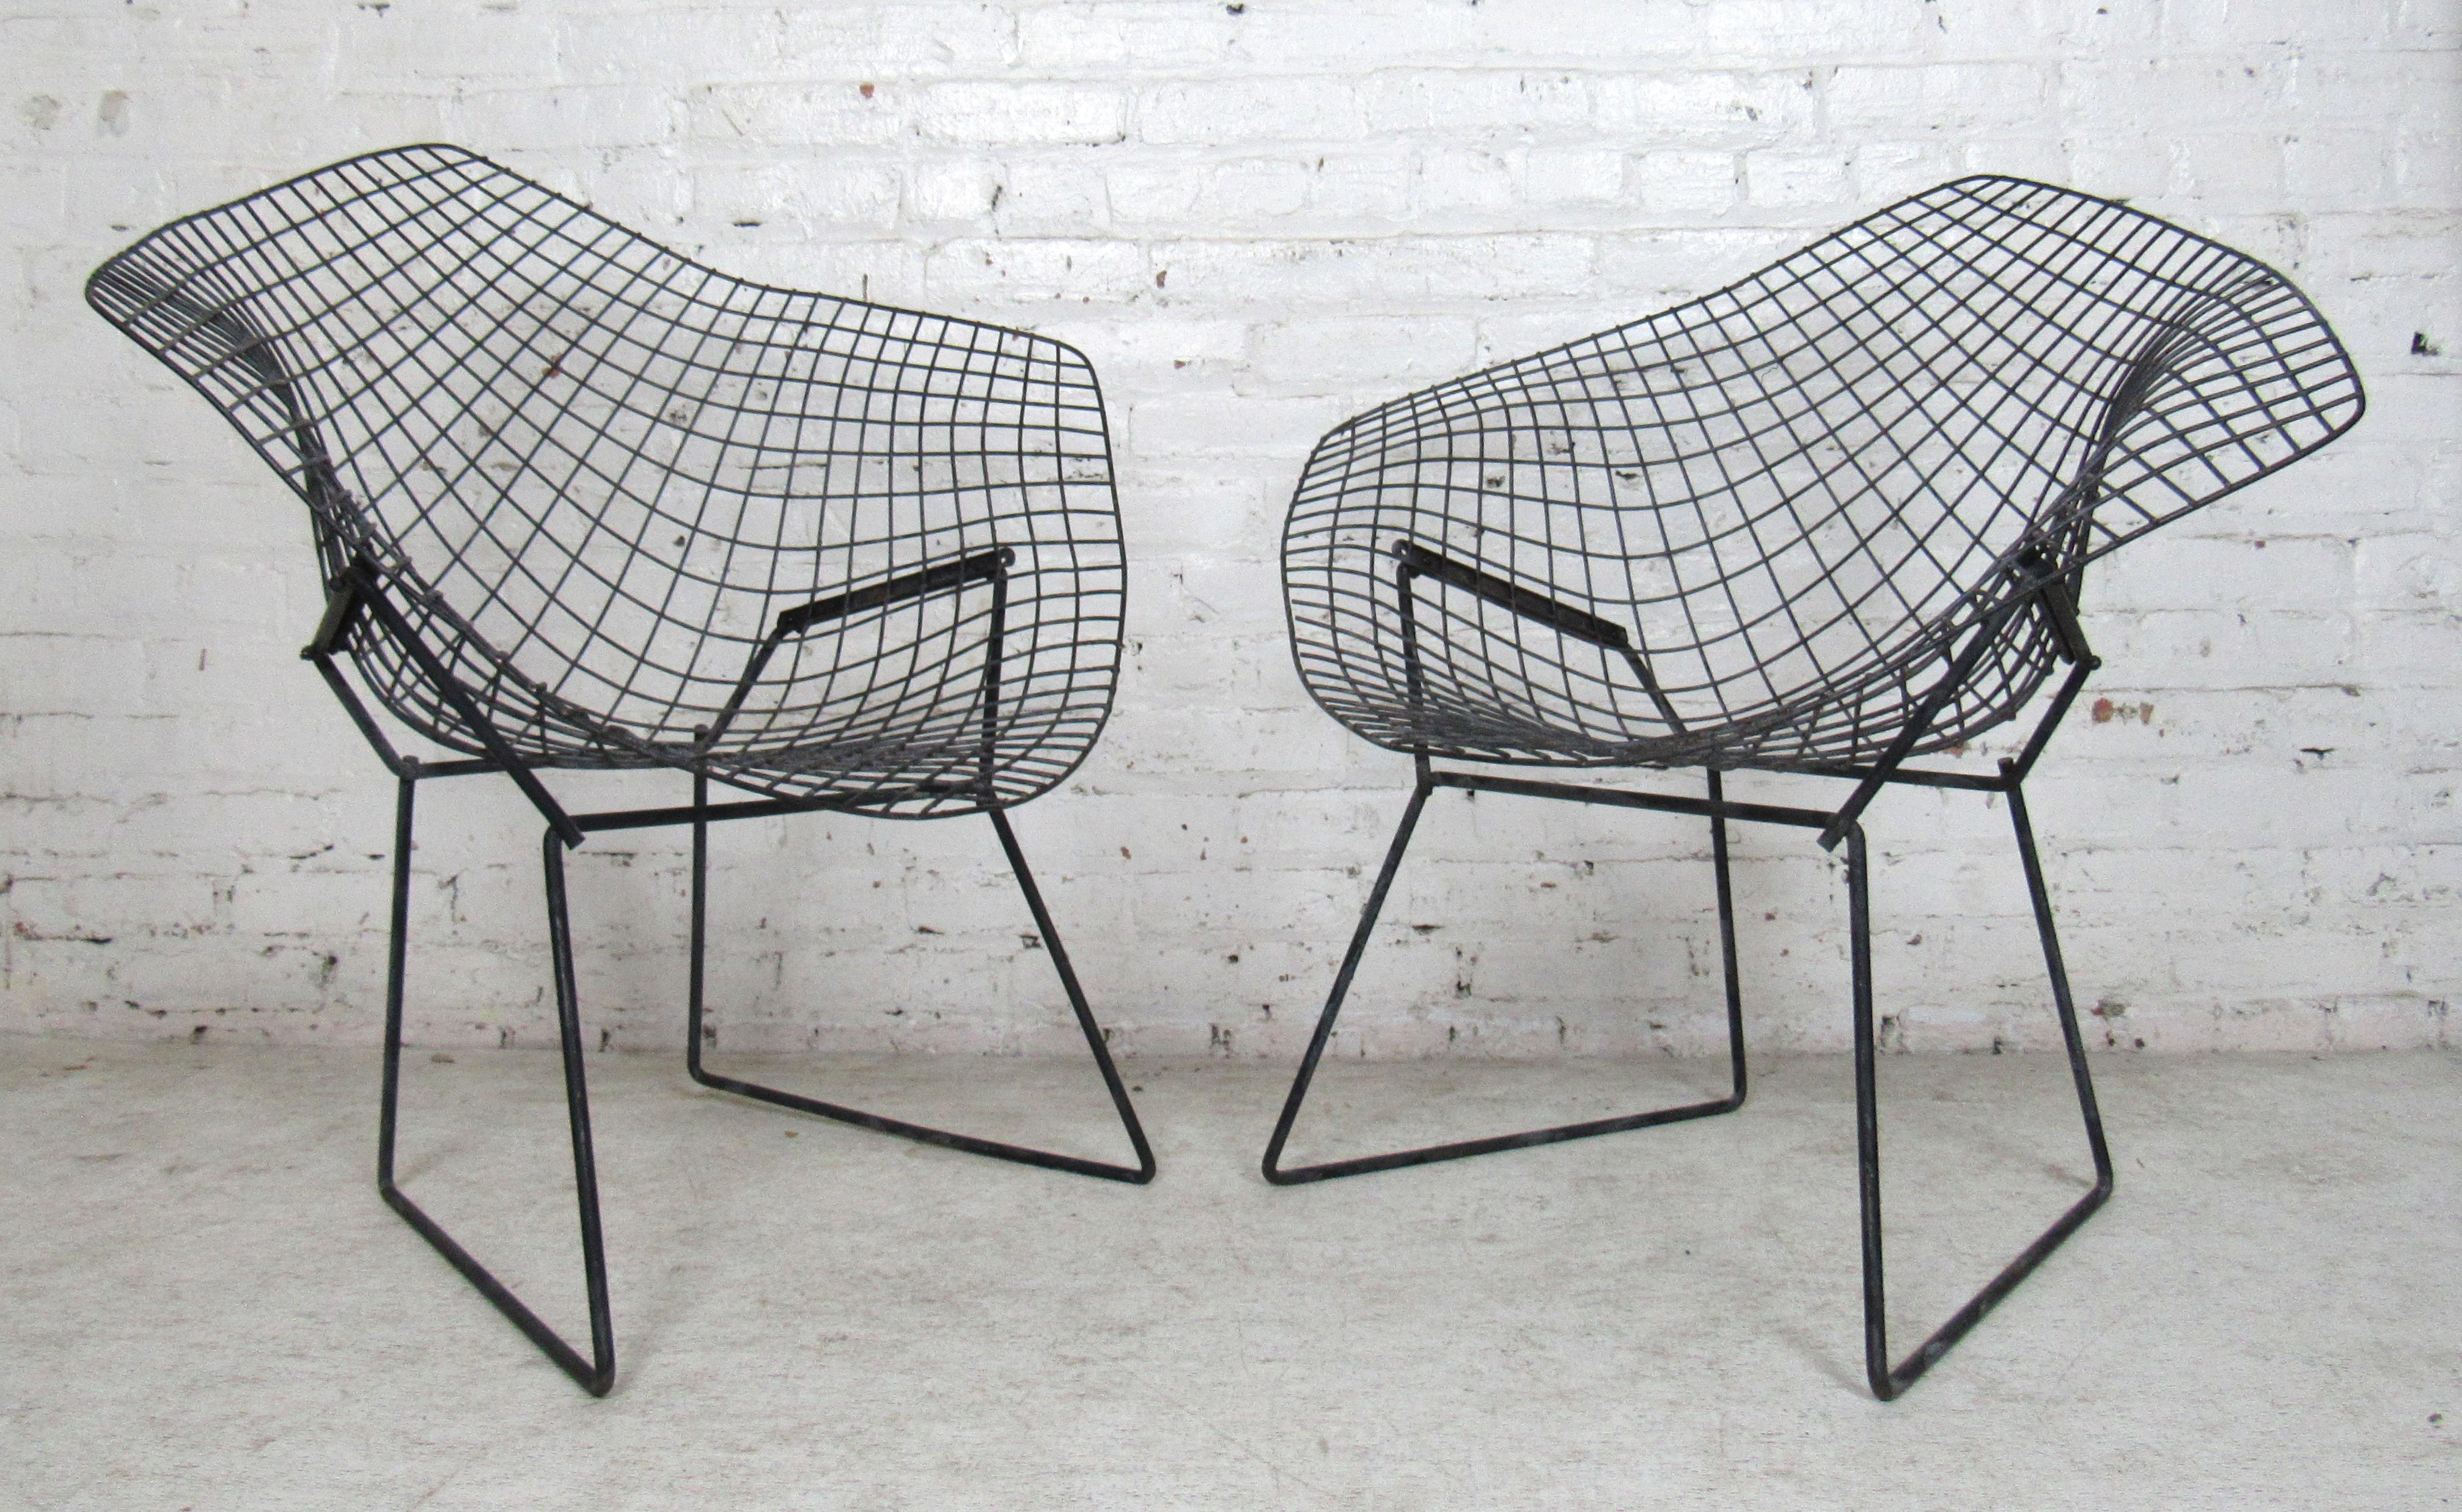 This pair of wire chairs in the style of Knoll's Bertoia diamond chairs impress with their visually stunning wire construction. Great for outdoor or indoor seating, the chairs are sure to Stand out in any setting.

Measures: Chair 1: 30.5